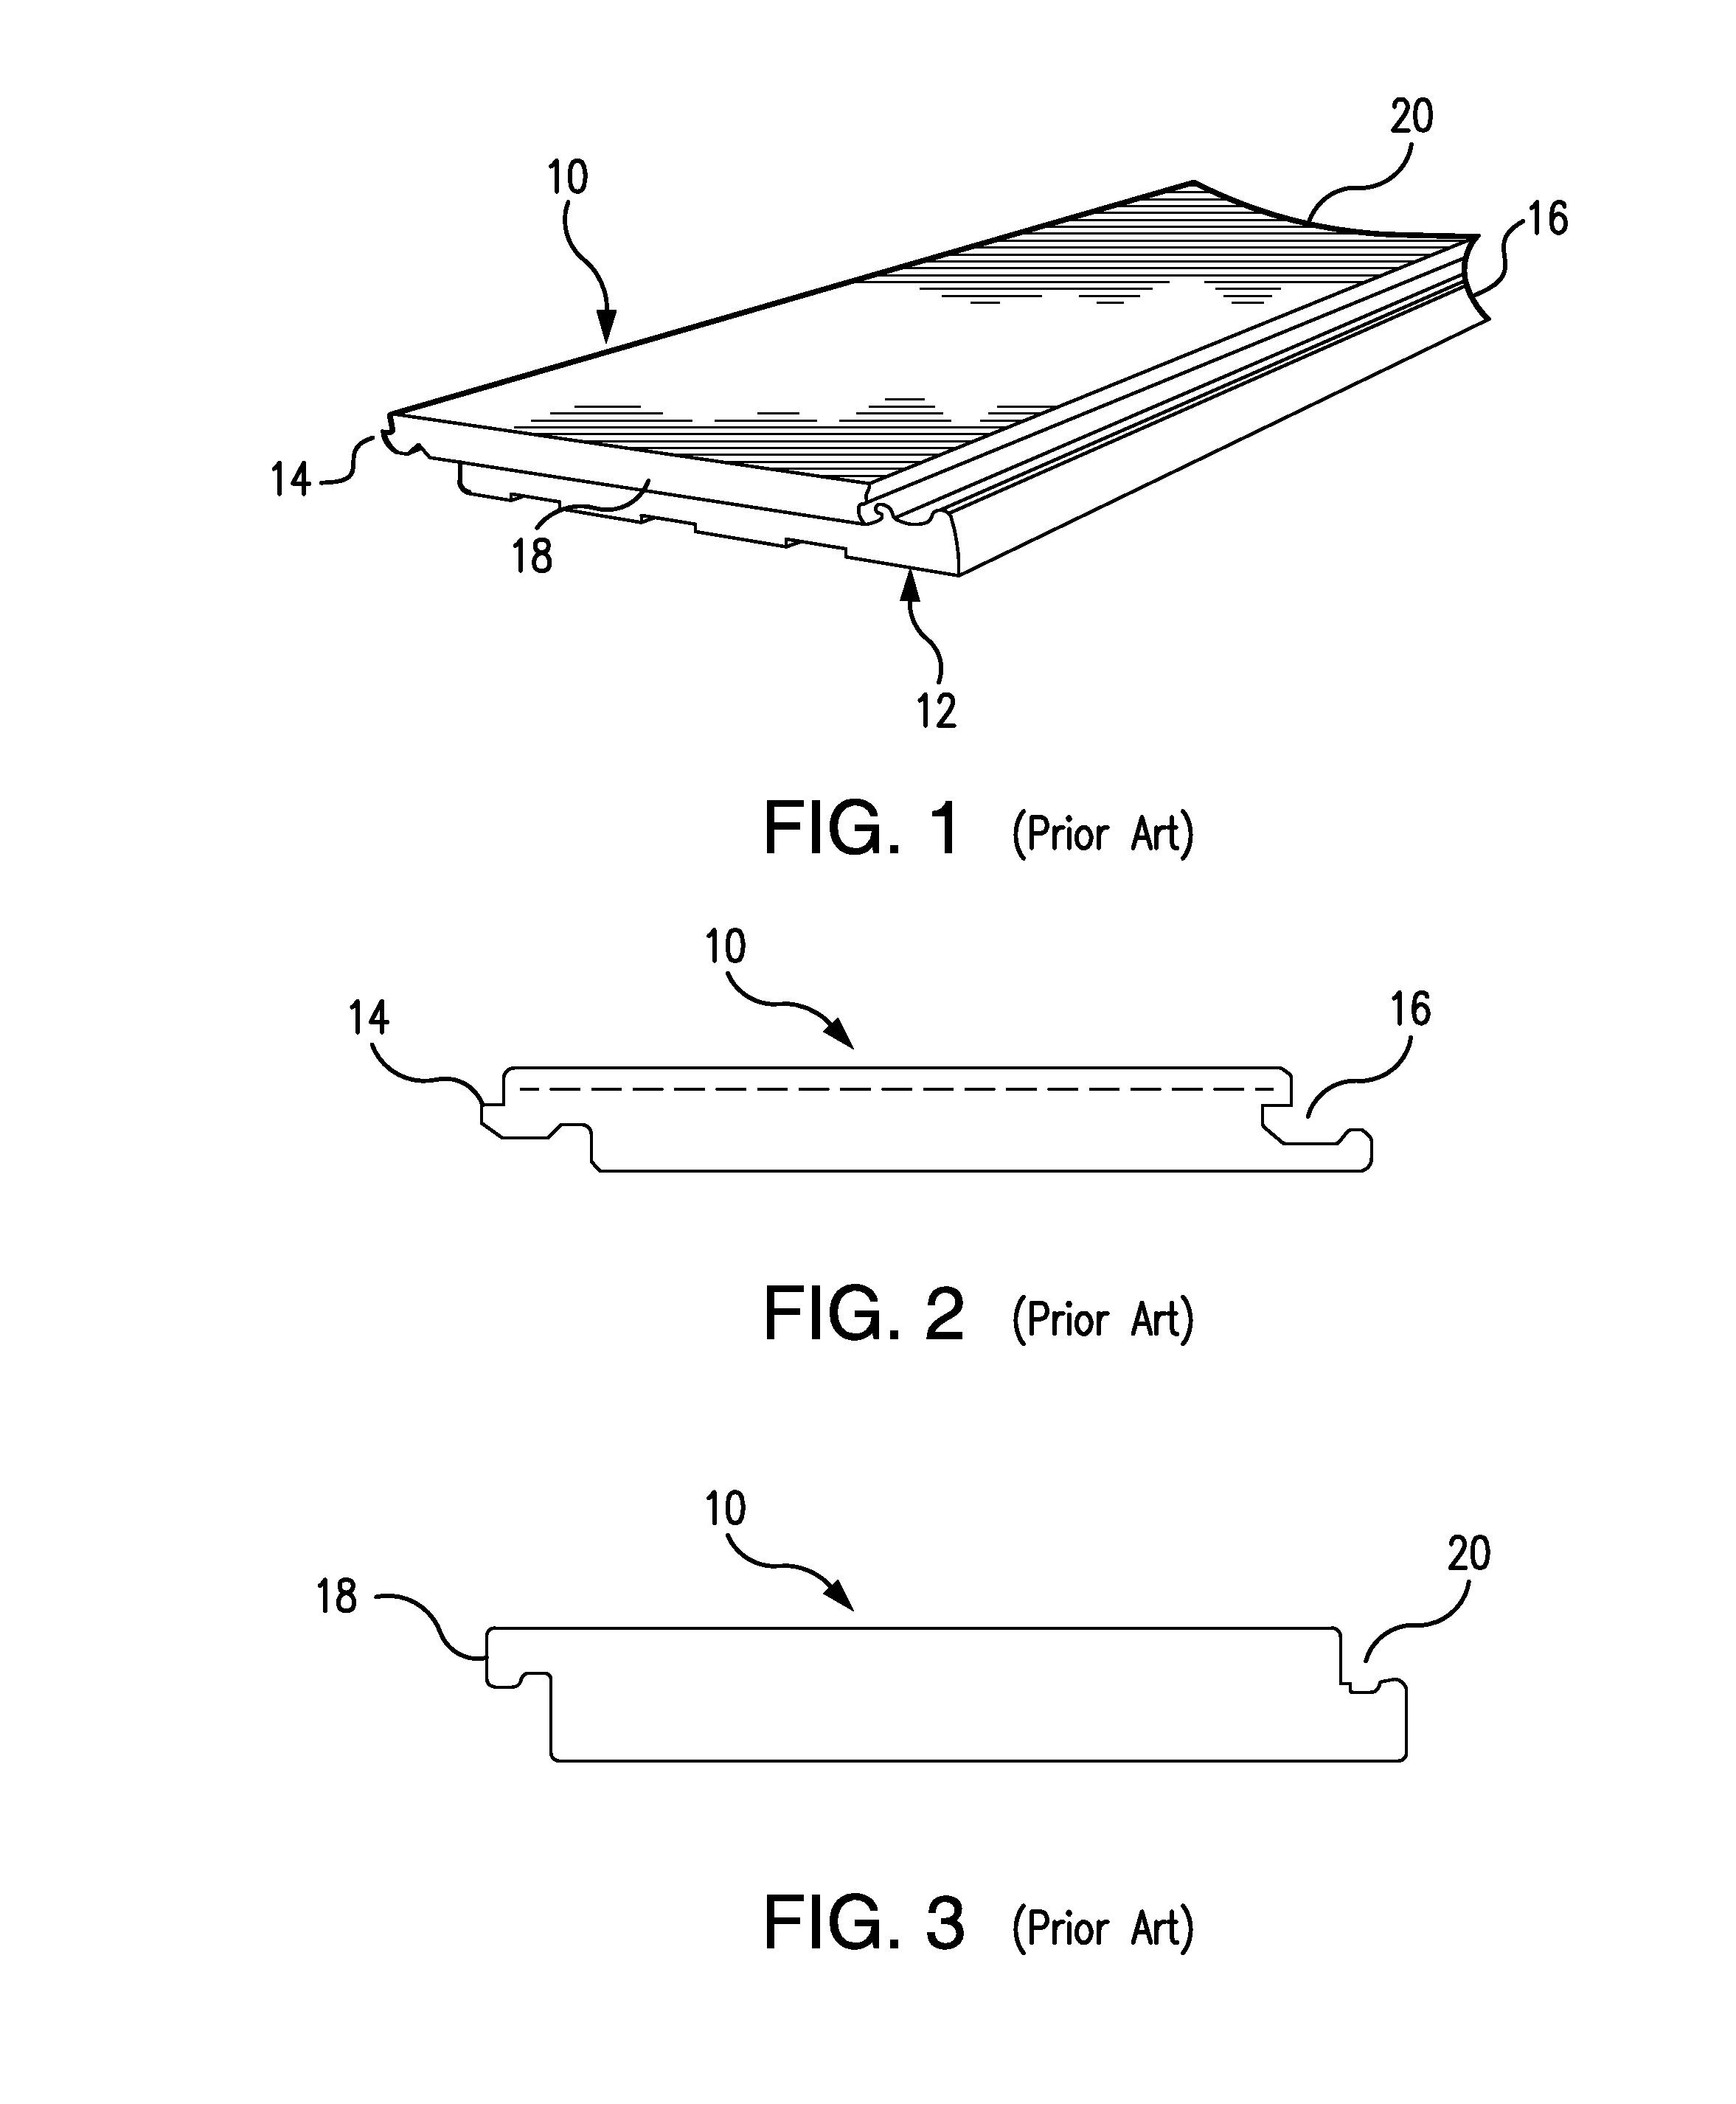 Non-squeaking wood flooring systems and methods